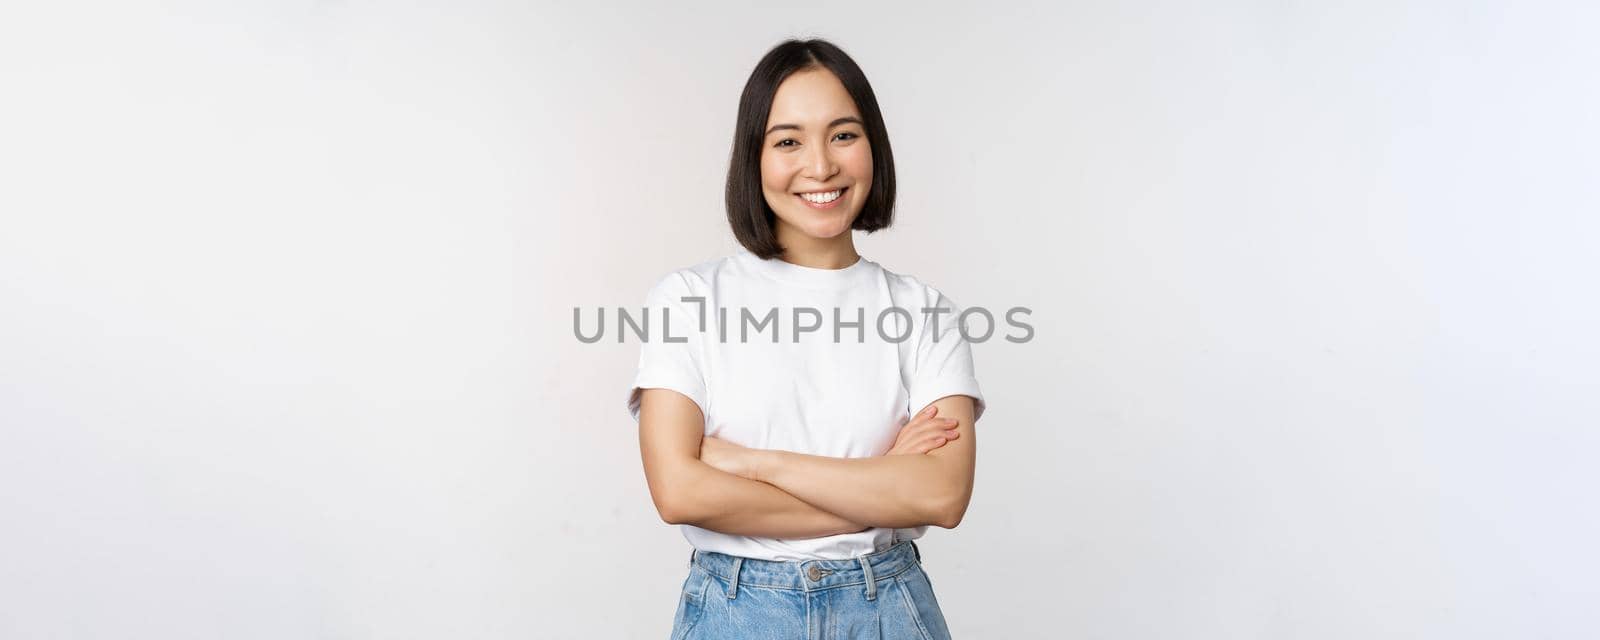 Portrait of happy asian woman smiling, posing confident, cross arms on chest, standing against studio background.